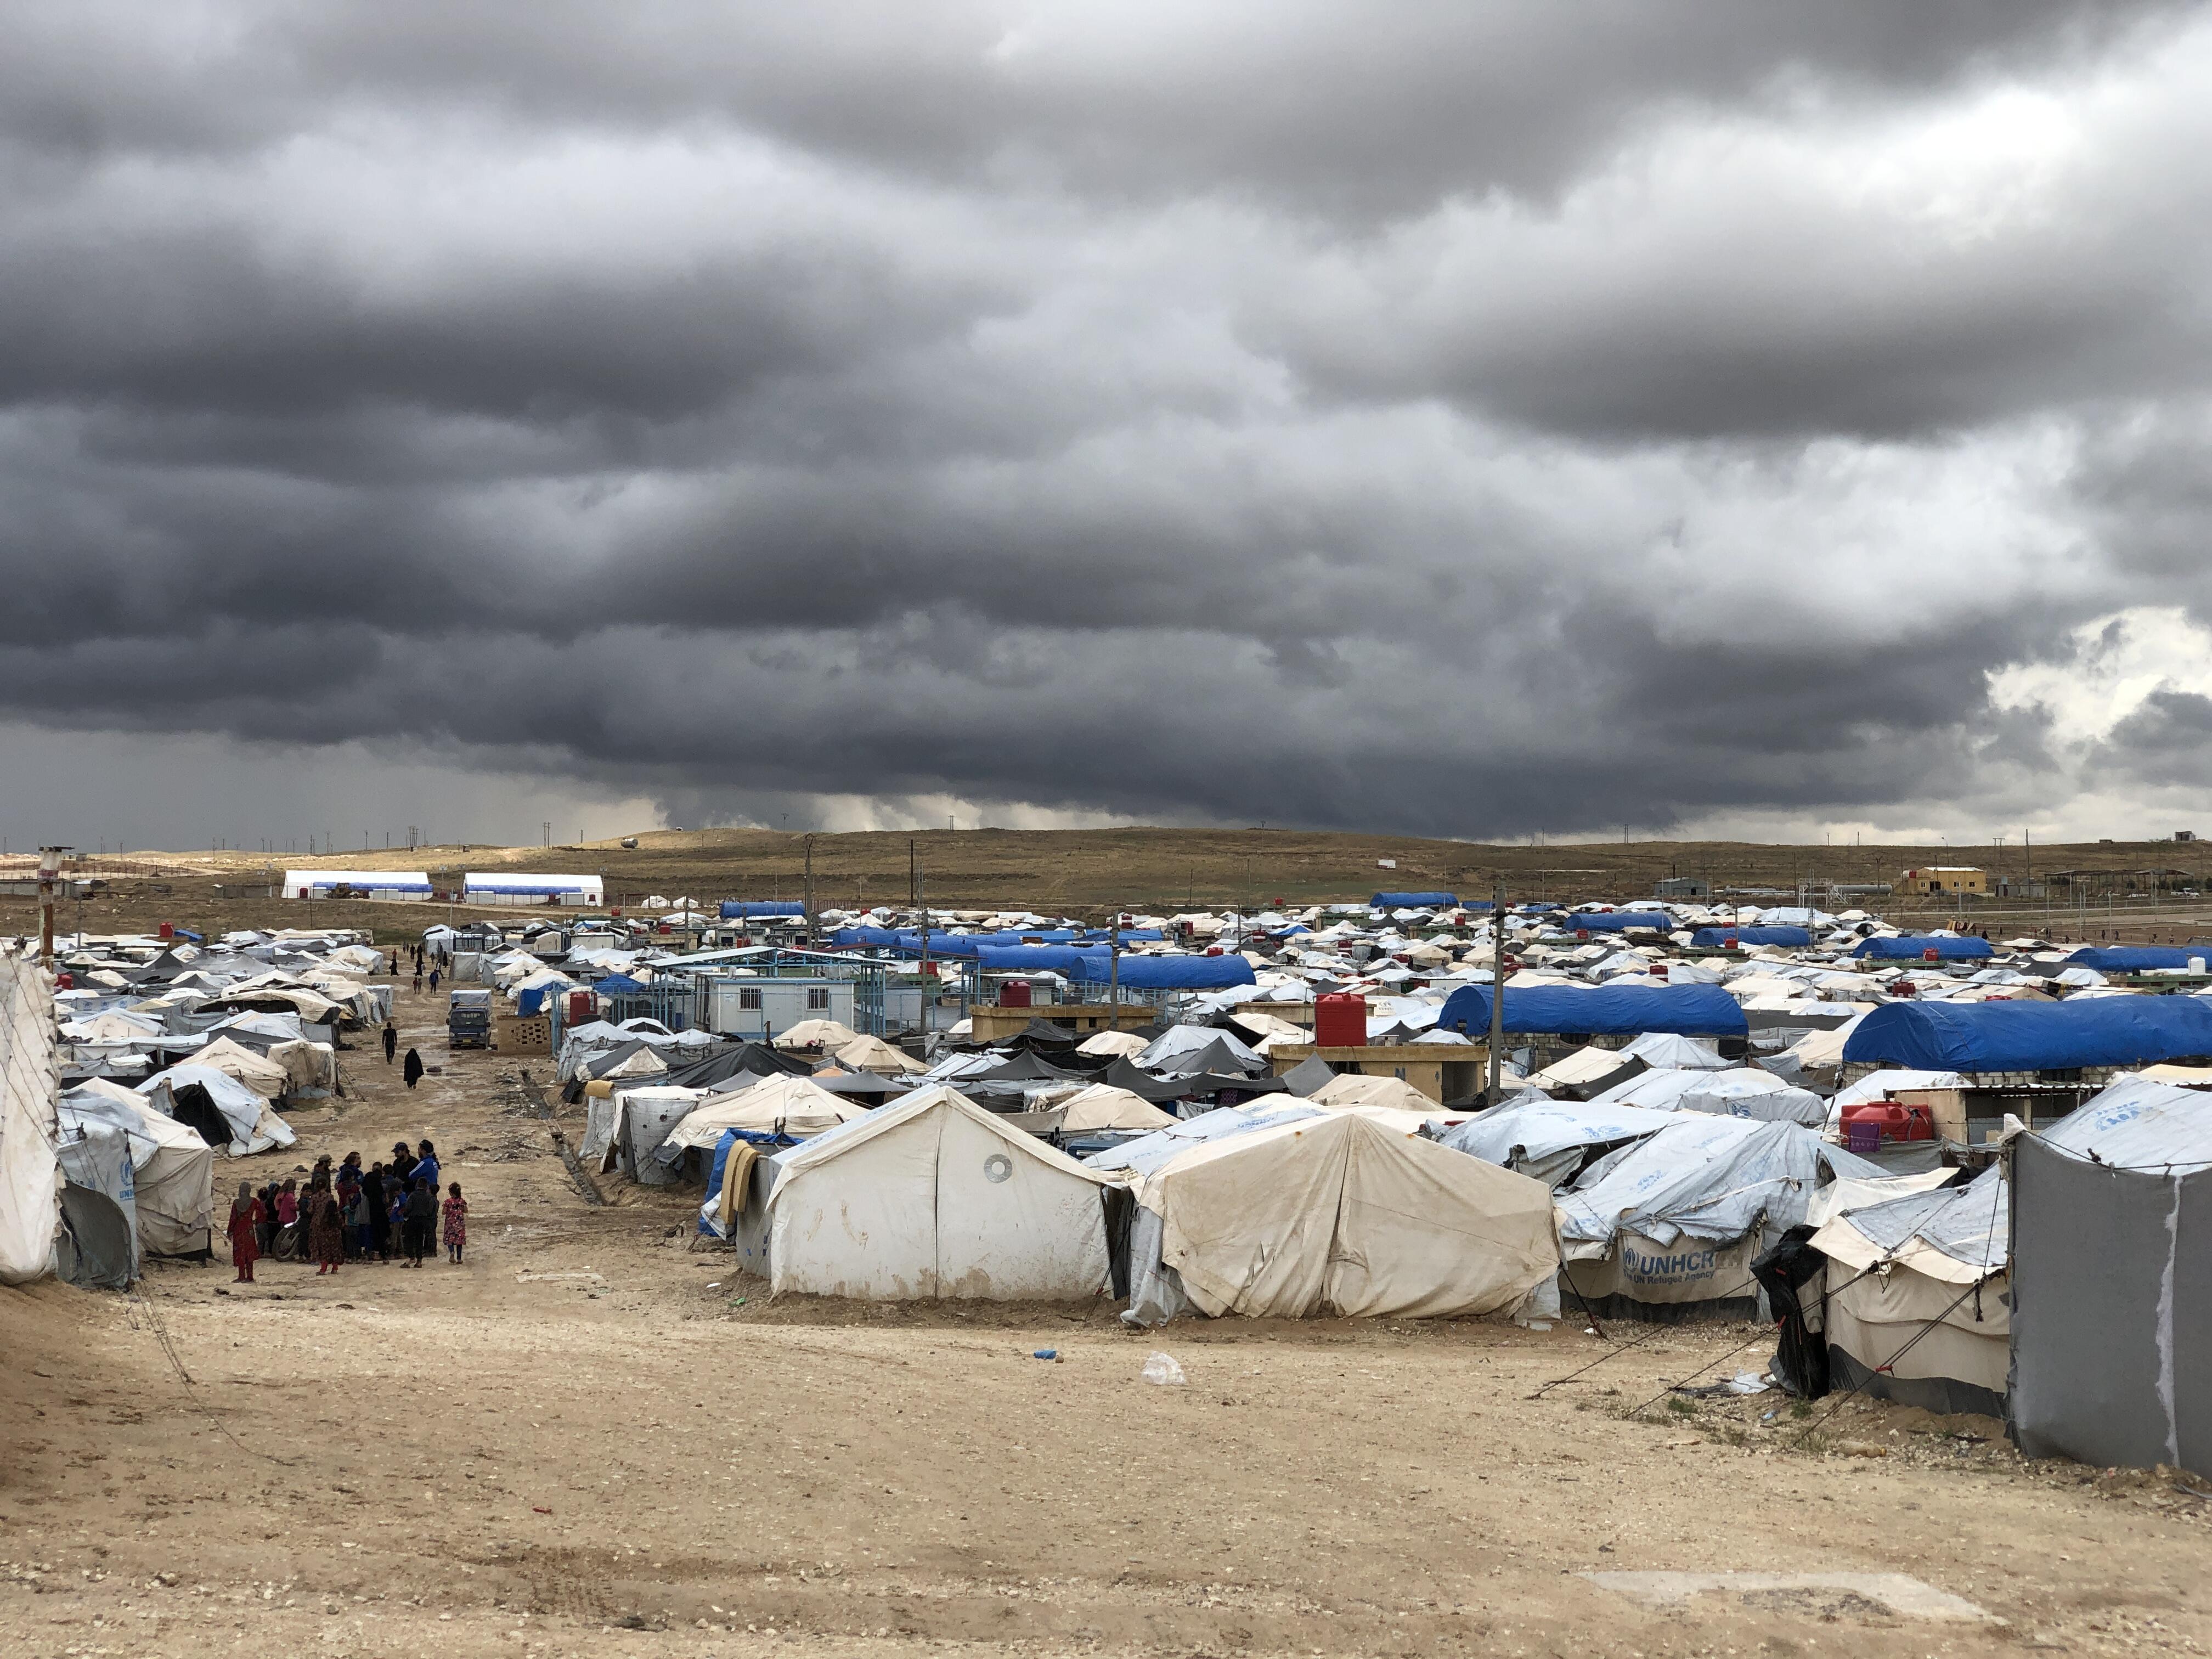 Dark clouds gather over the tents of Al Hol camp in northeastern Syria, now home to families displaced by 10 years of conflict